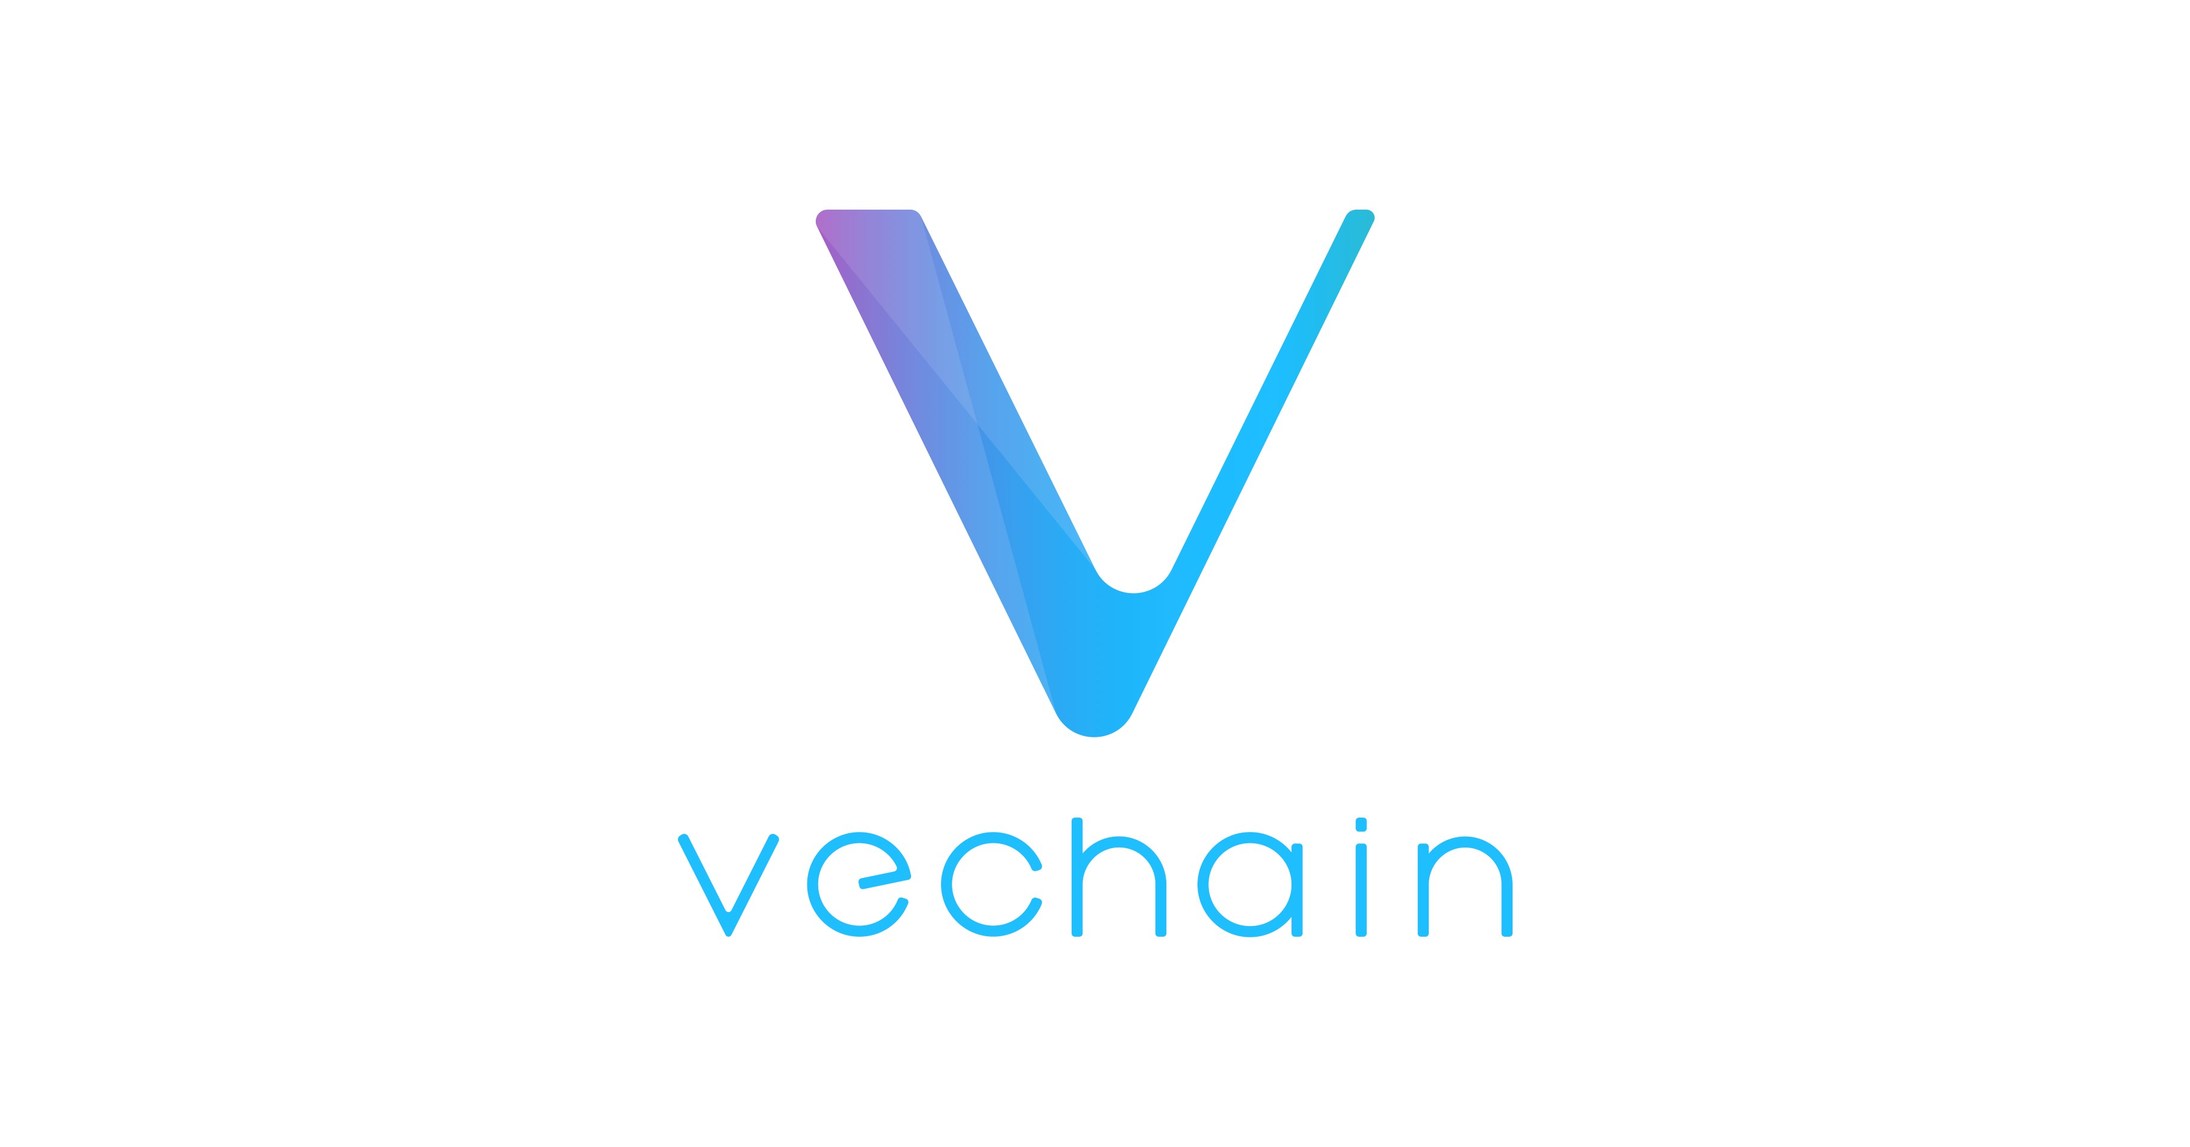 VeChain Introduces New Blockchain-enabled Sustainability Solution To Power  "Green Business" For Enterprises